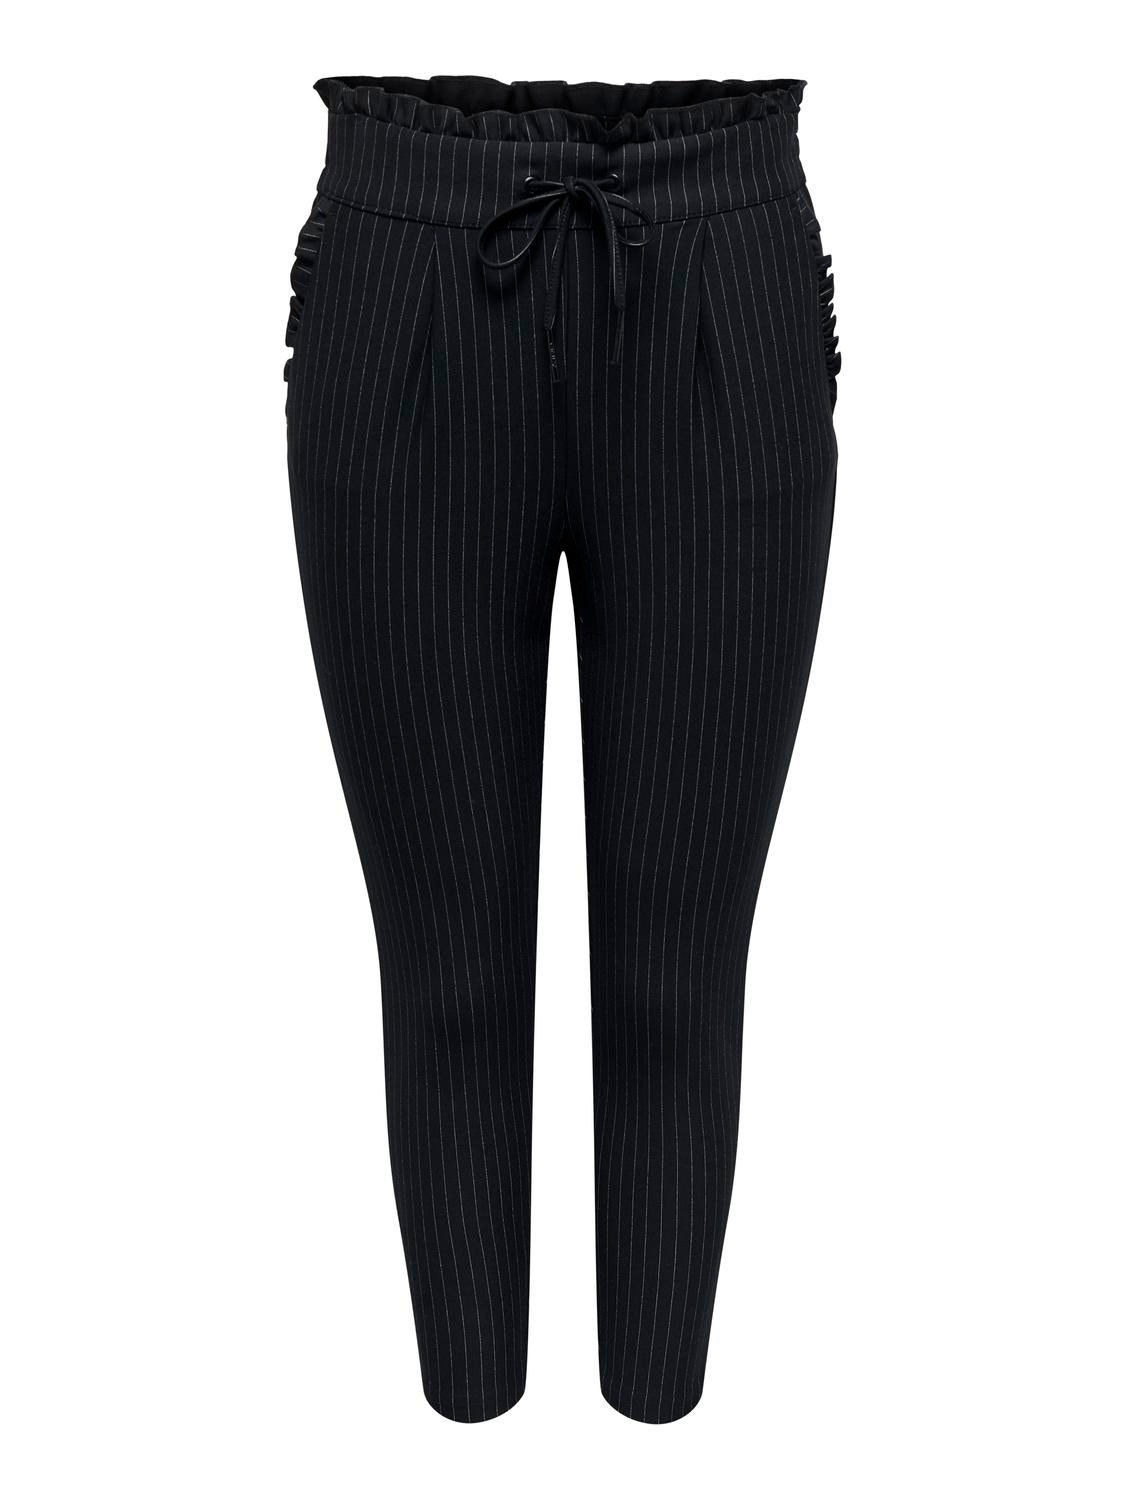 ONLY Petite Pinstriped Trousers -Black - 15177939